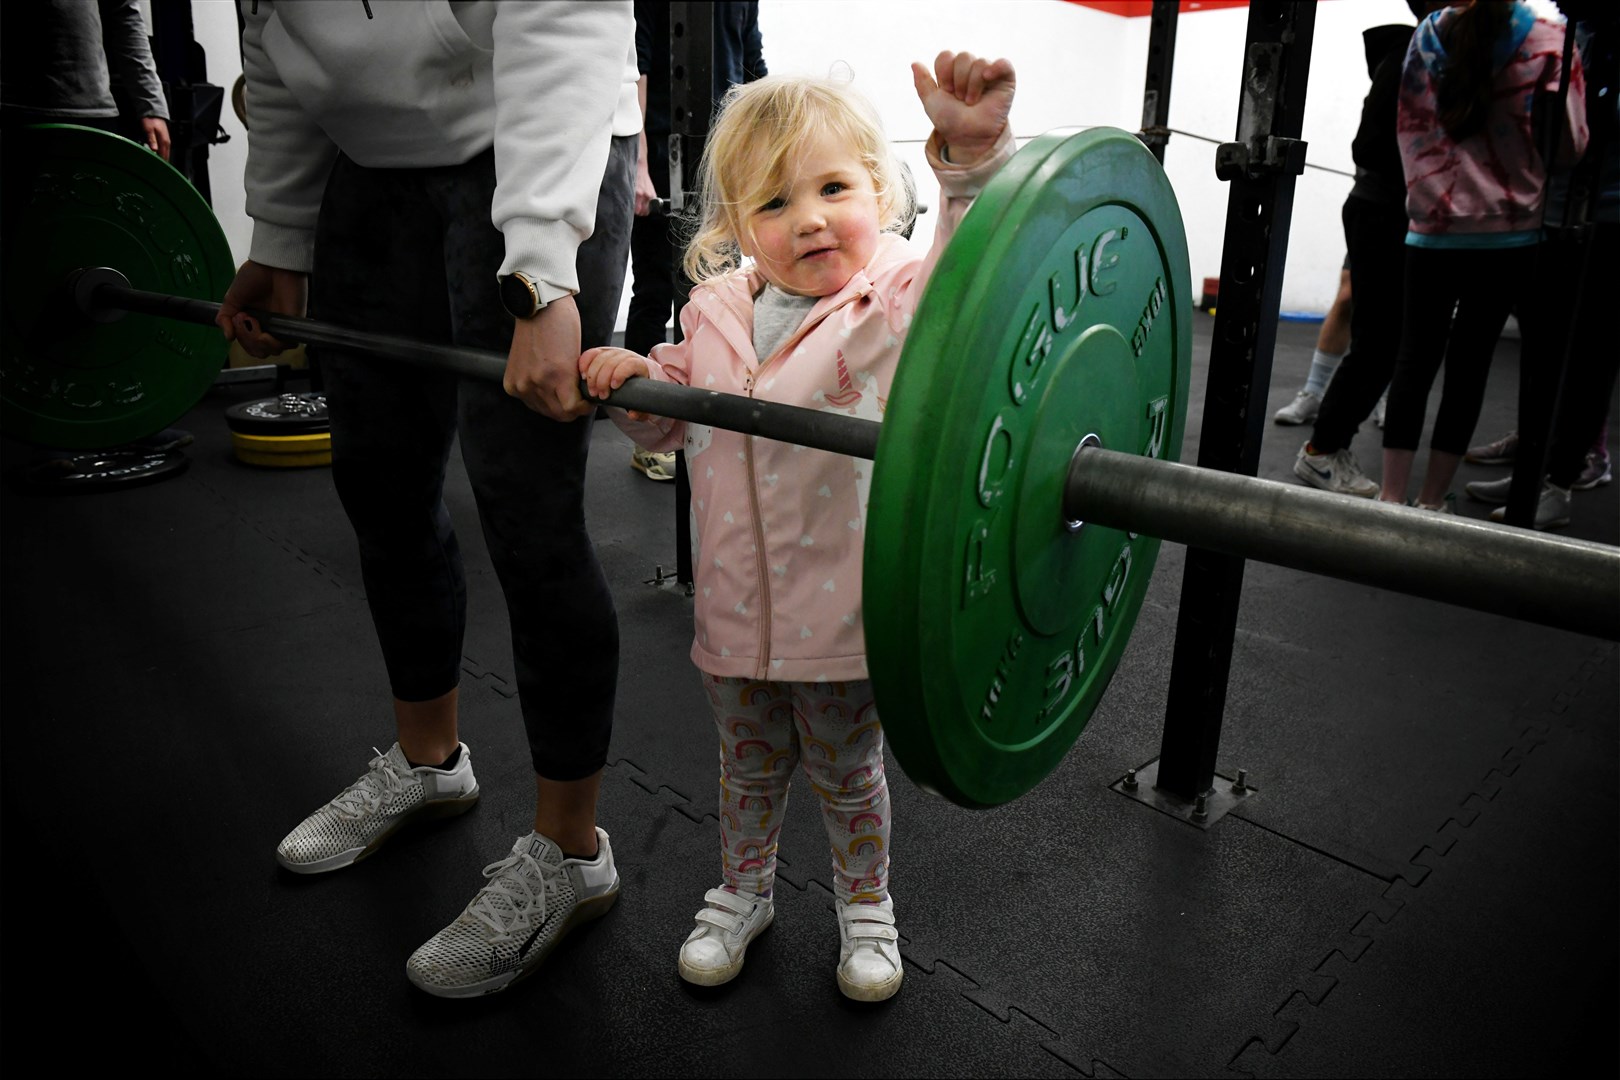 Mia Stewart, who is two and a half years old, deadlifting with one hand. Picture: James Mackenzie